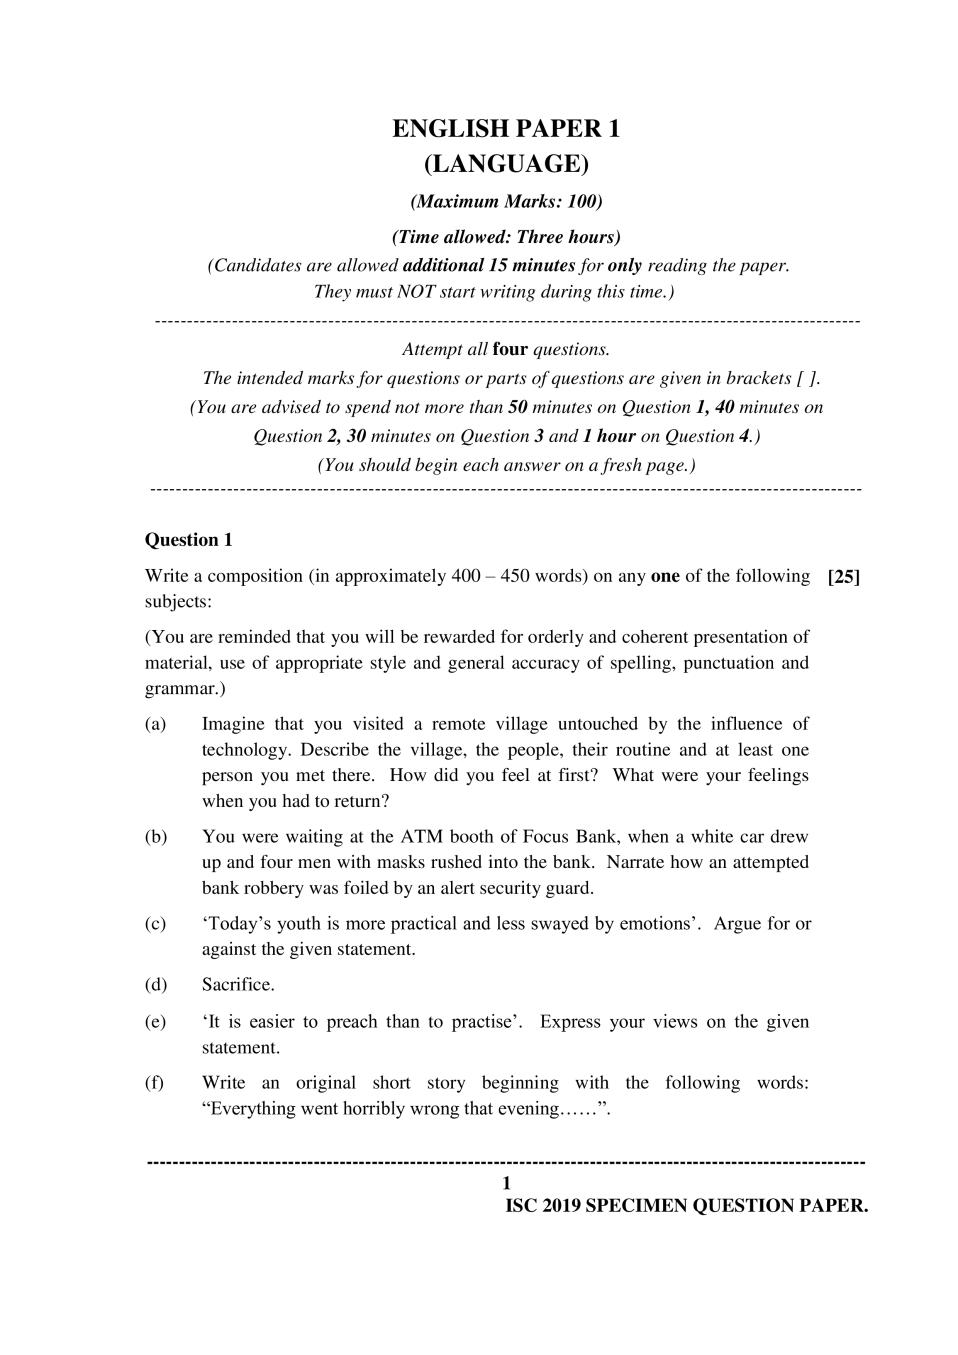 ISC Class 12 Specimen Paper 2019 for English Paper 1 - Page 1